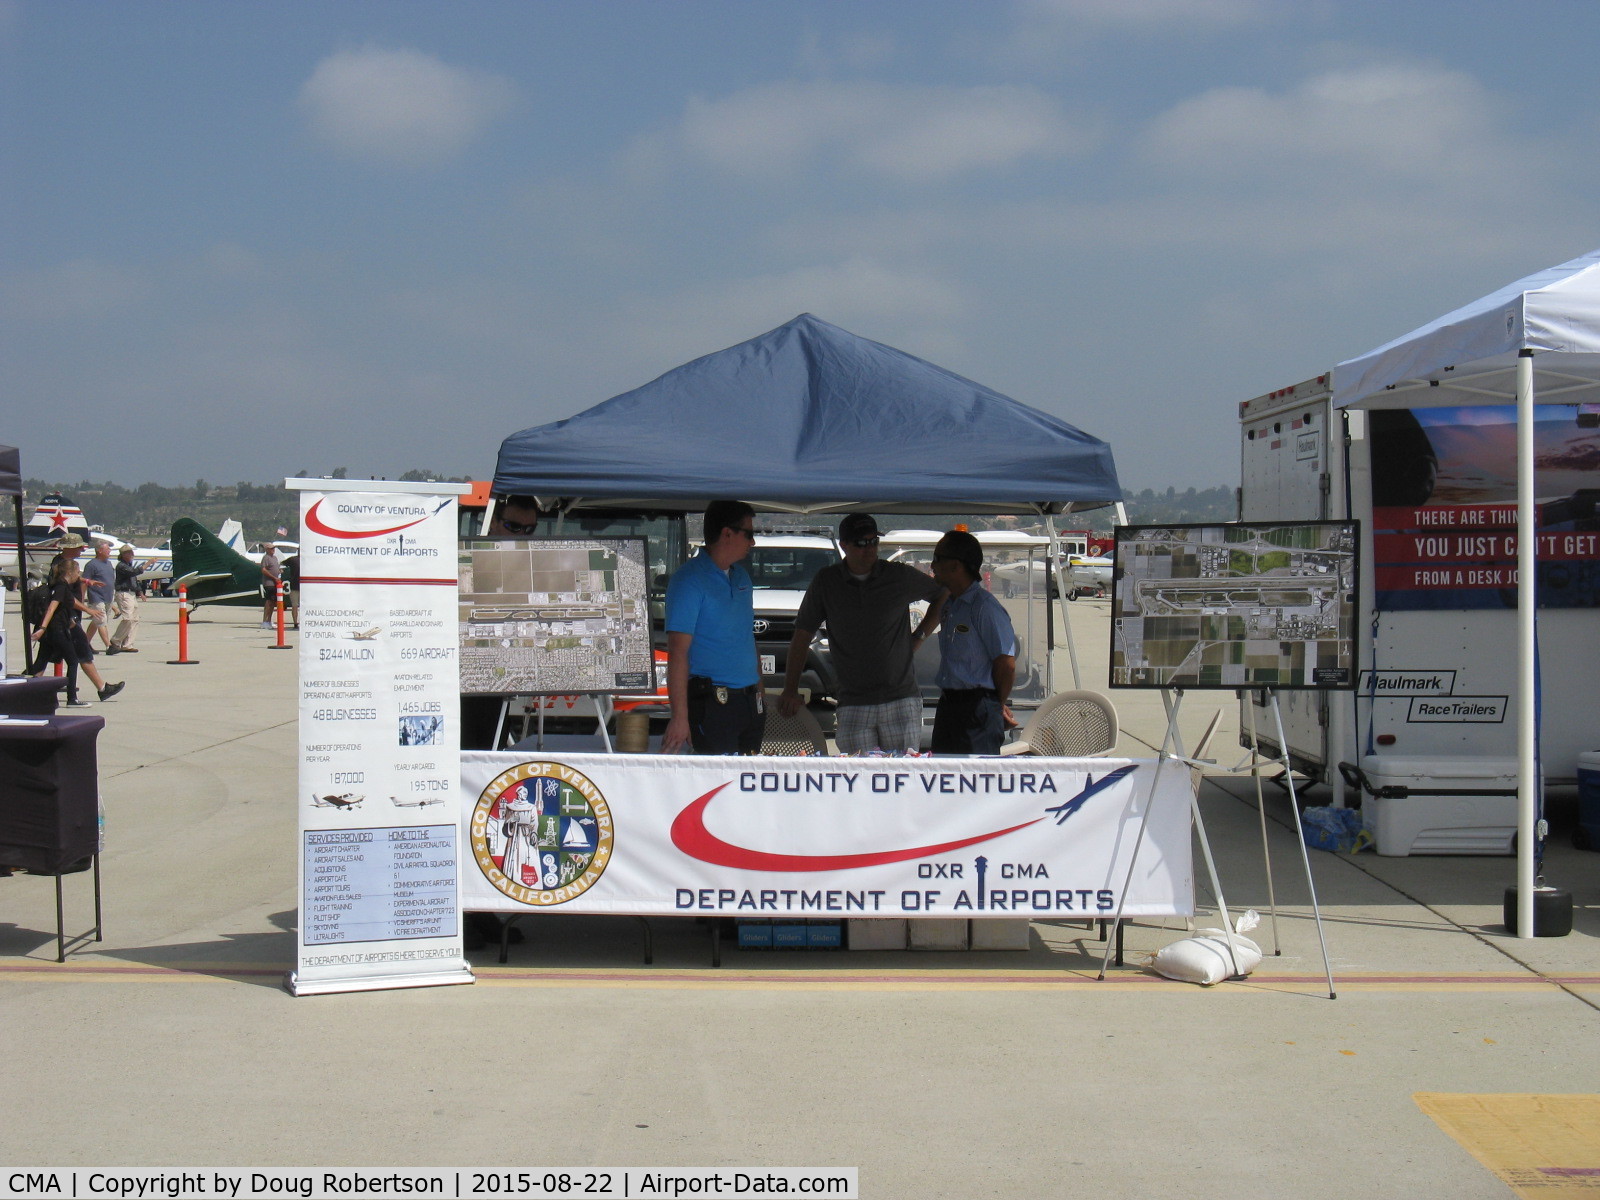 Camarillo Airport (CMA) - Ventura County Dept. of Airports display booth at 2015 Wings Over Camarillo Airshow. Maintains OXR & CMA airports from CMA Headquarters.